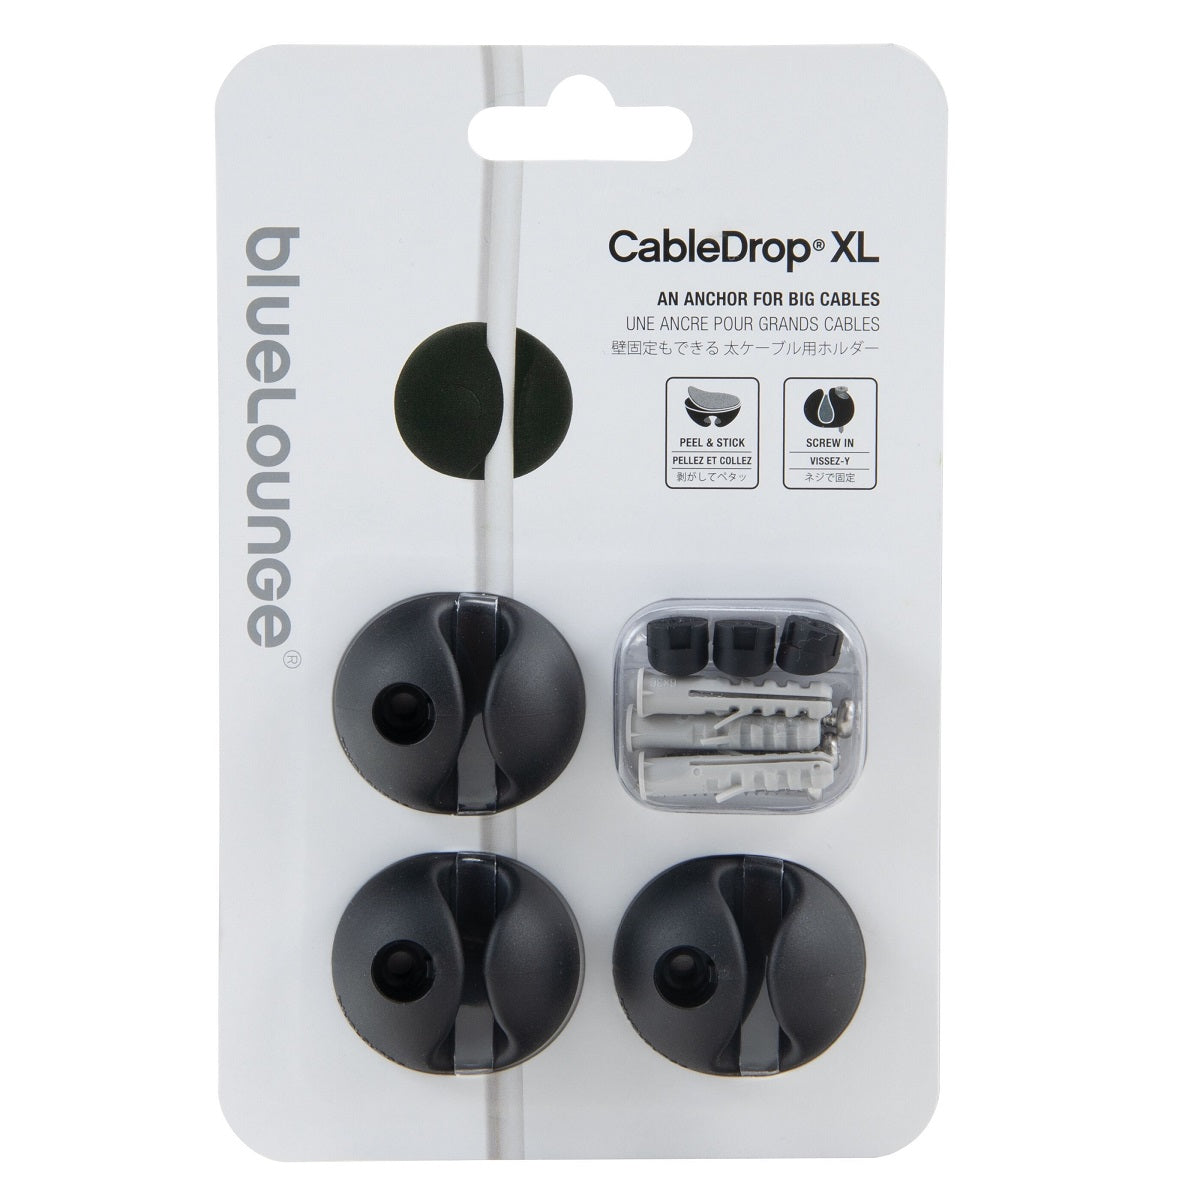 Bluelounge_cabledrop_XL_retail_packing.jpg